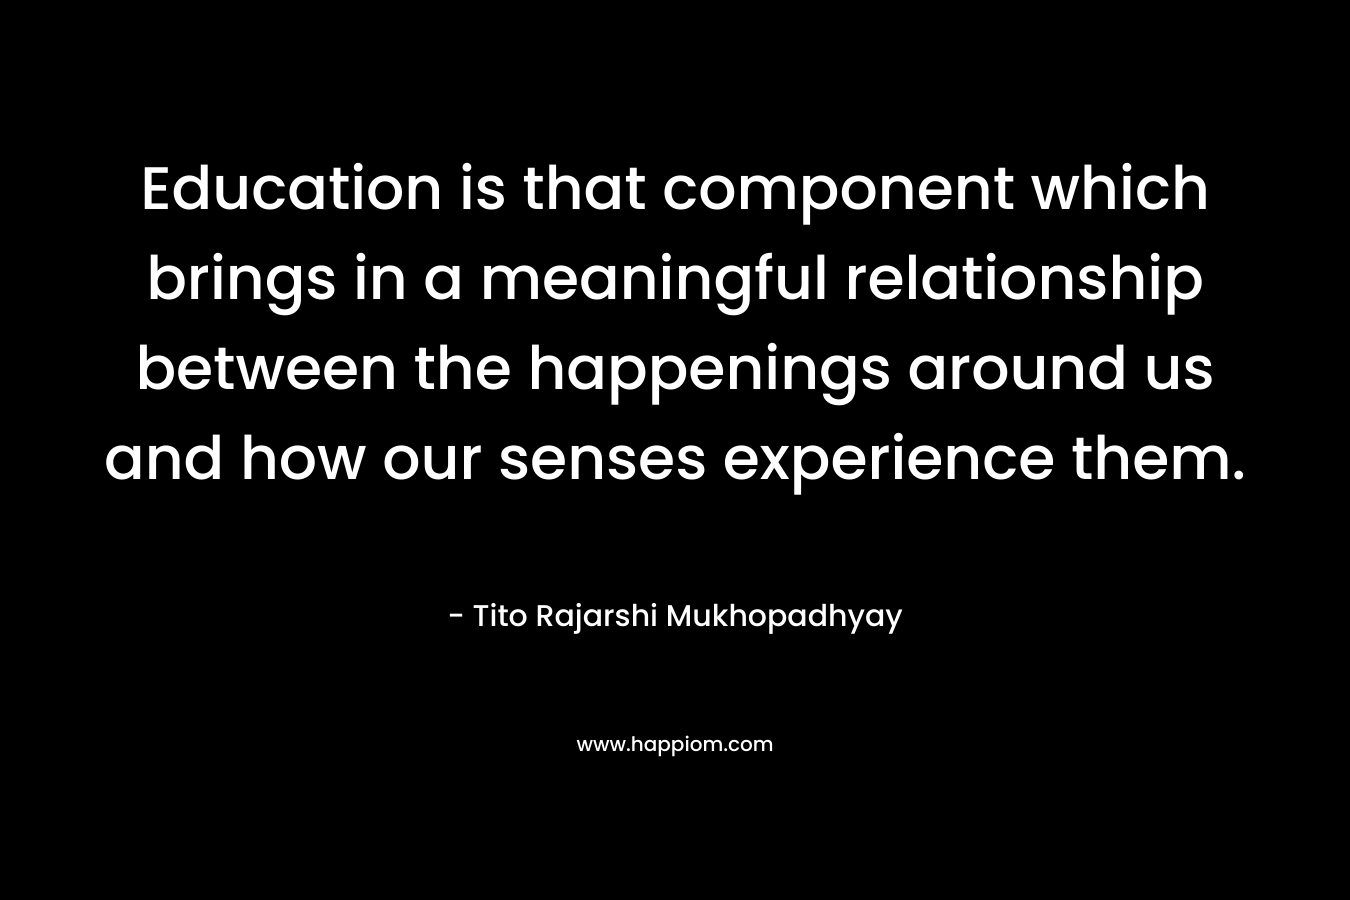 Education is that component which brings in a meaningful relationship between the happenings around us and how our senses experience them. – Tito Rajarshi Mukhopadhyay